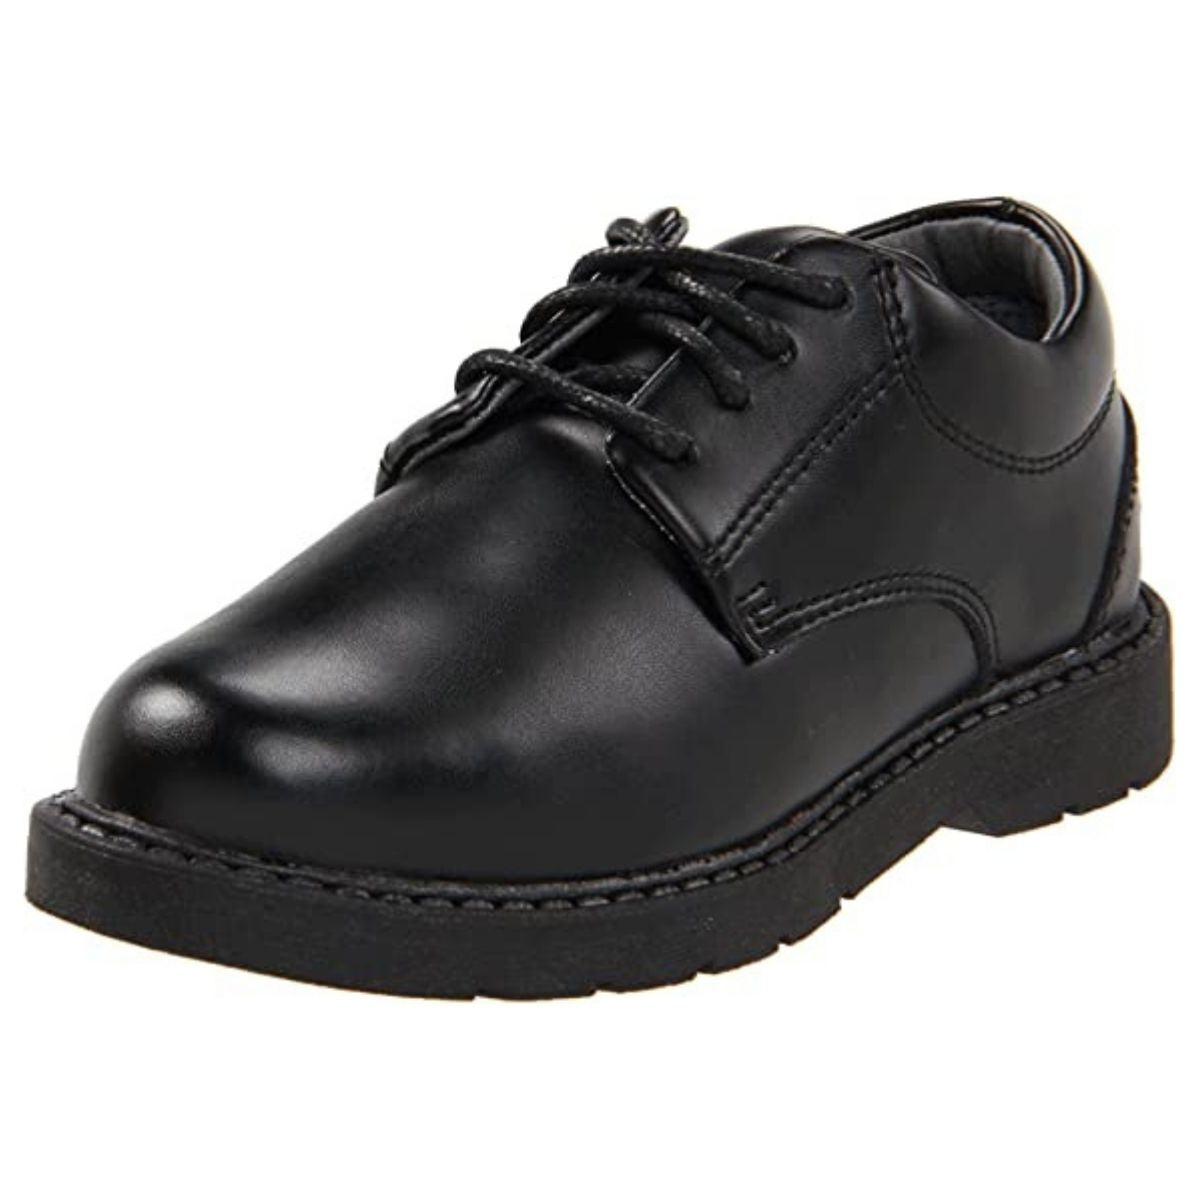 SCHOOL ISSUE BLACK LACE UP SCHOLAR- MENS